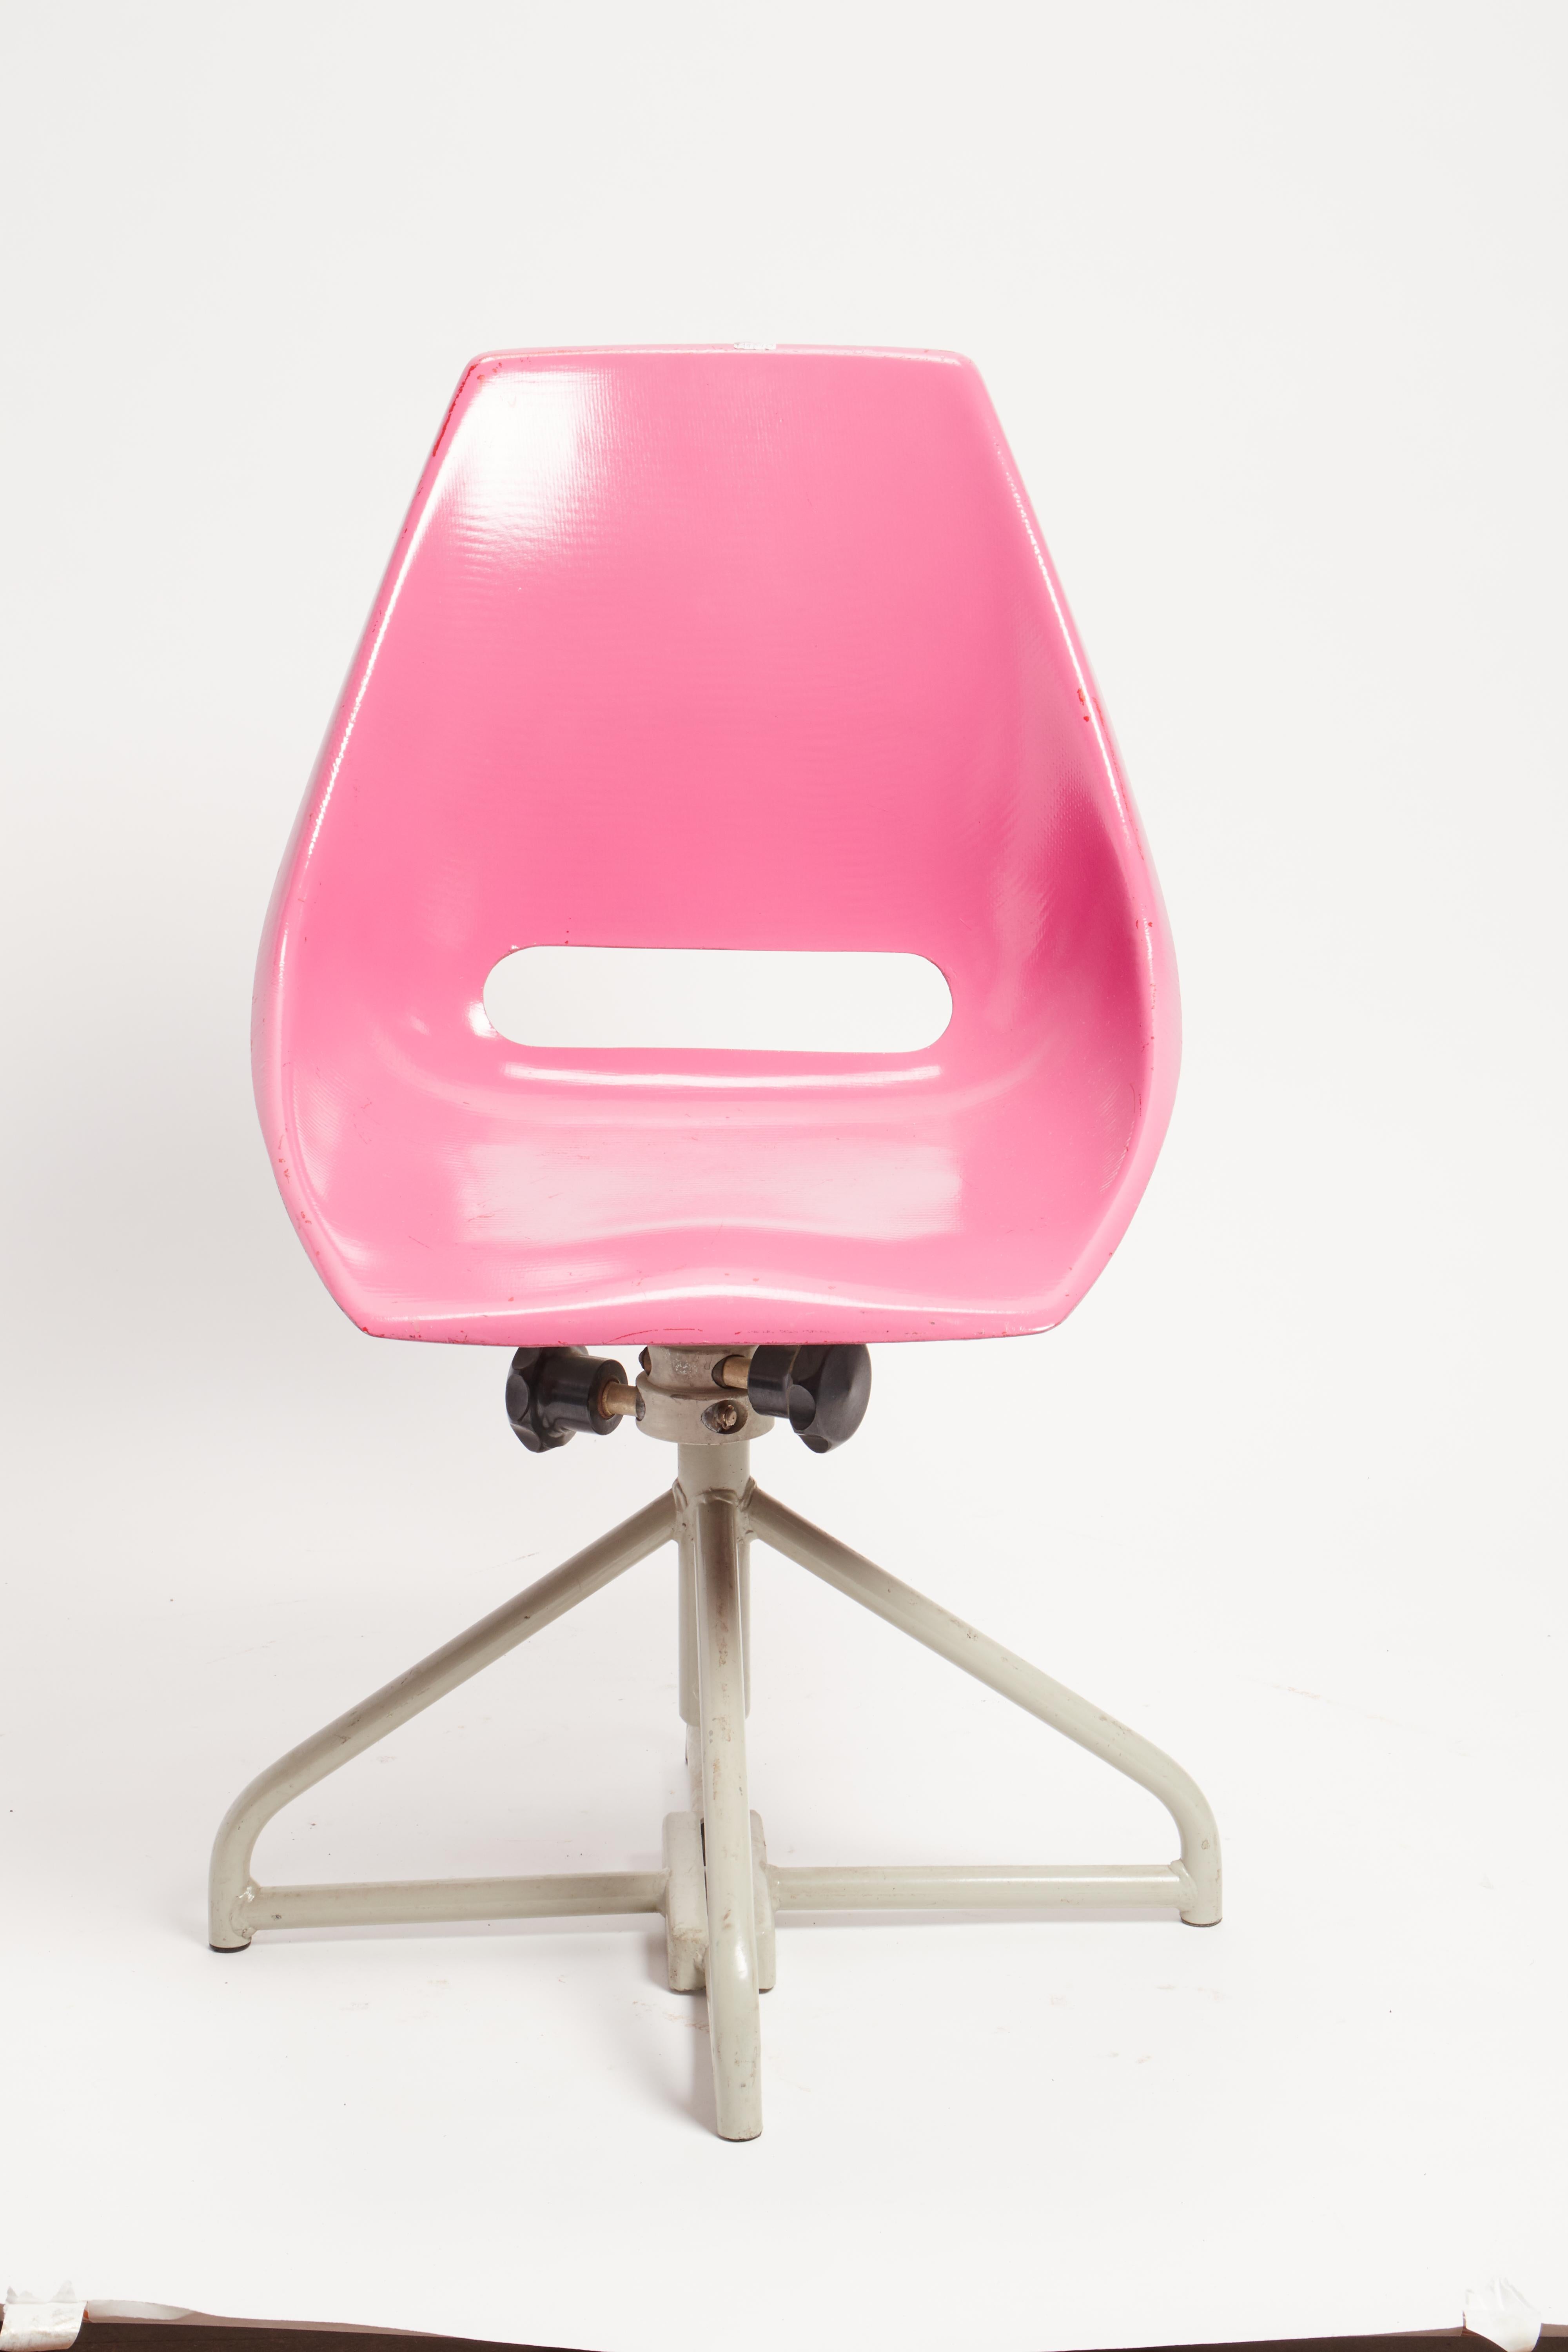 Multicolor Adjustable Fiberglass Chairs, Italy, 1950 For Sale 5